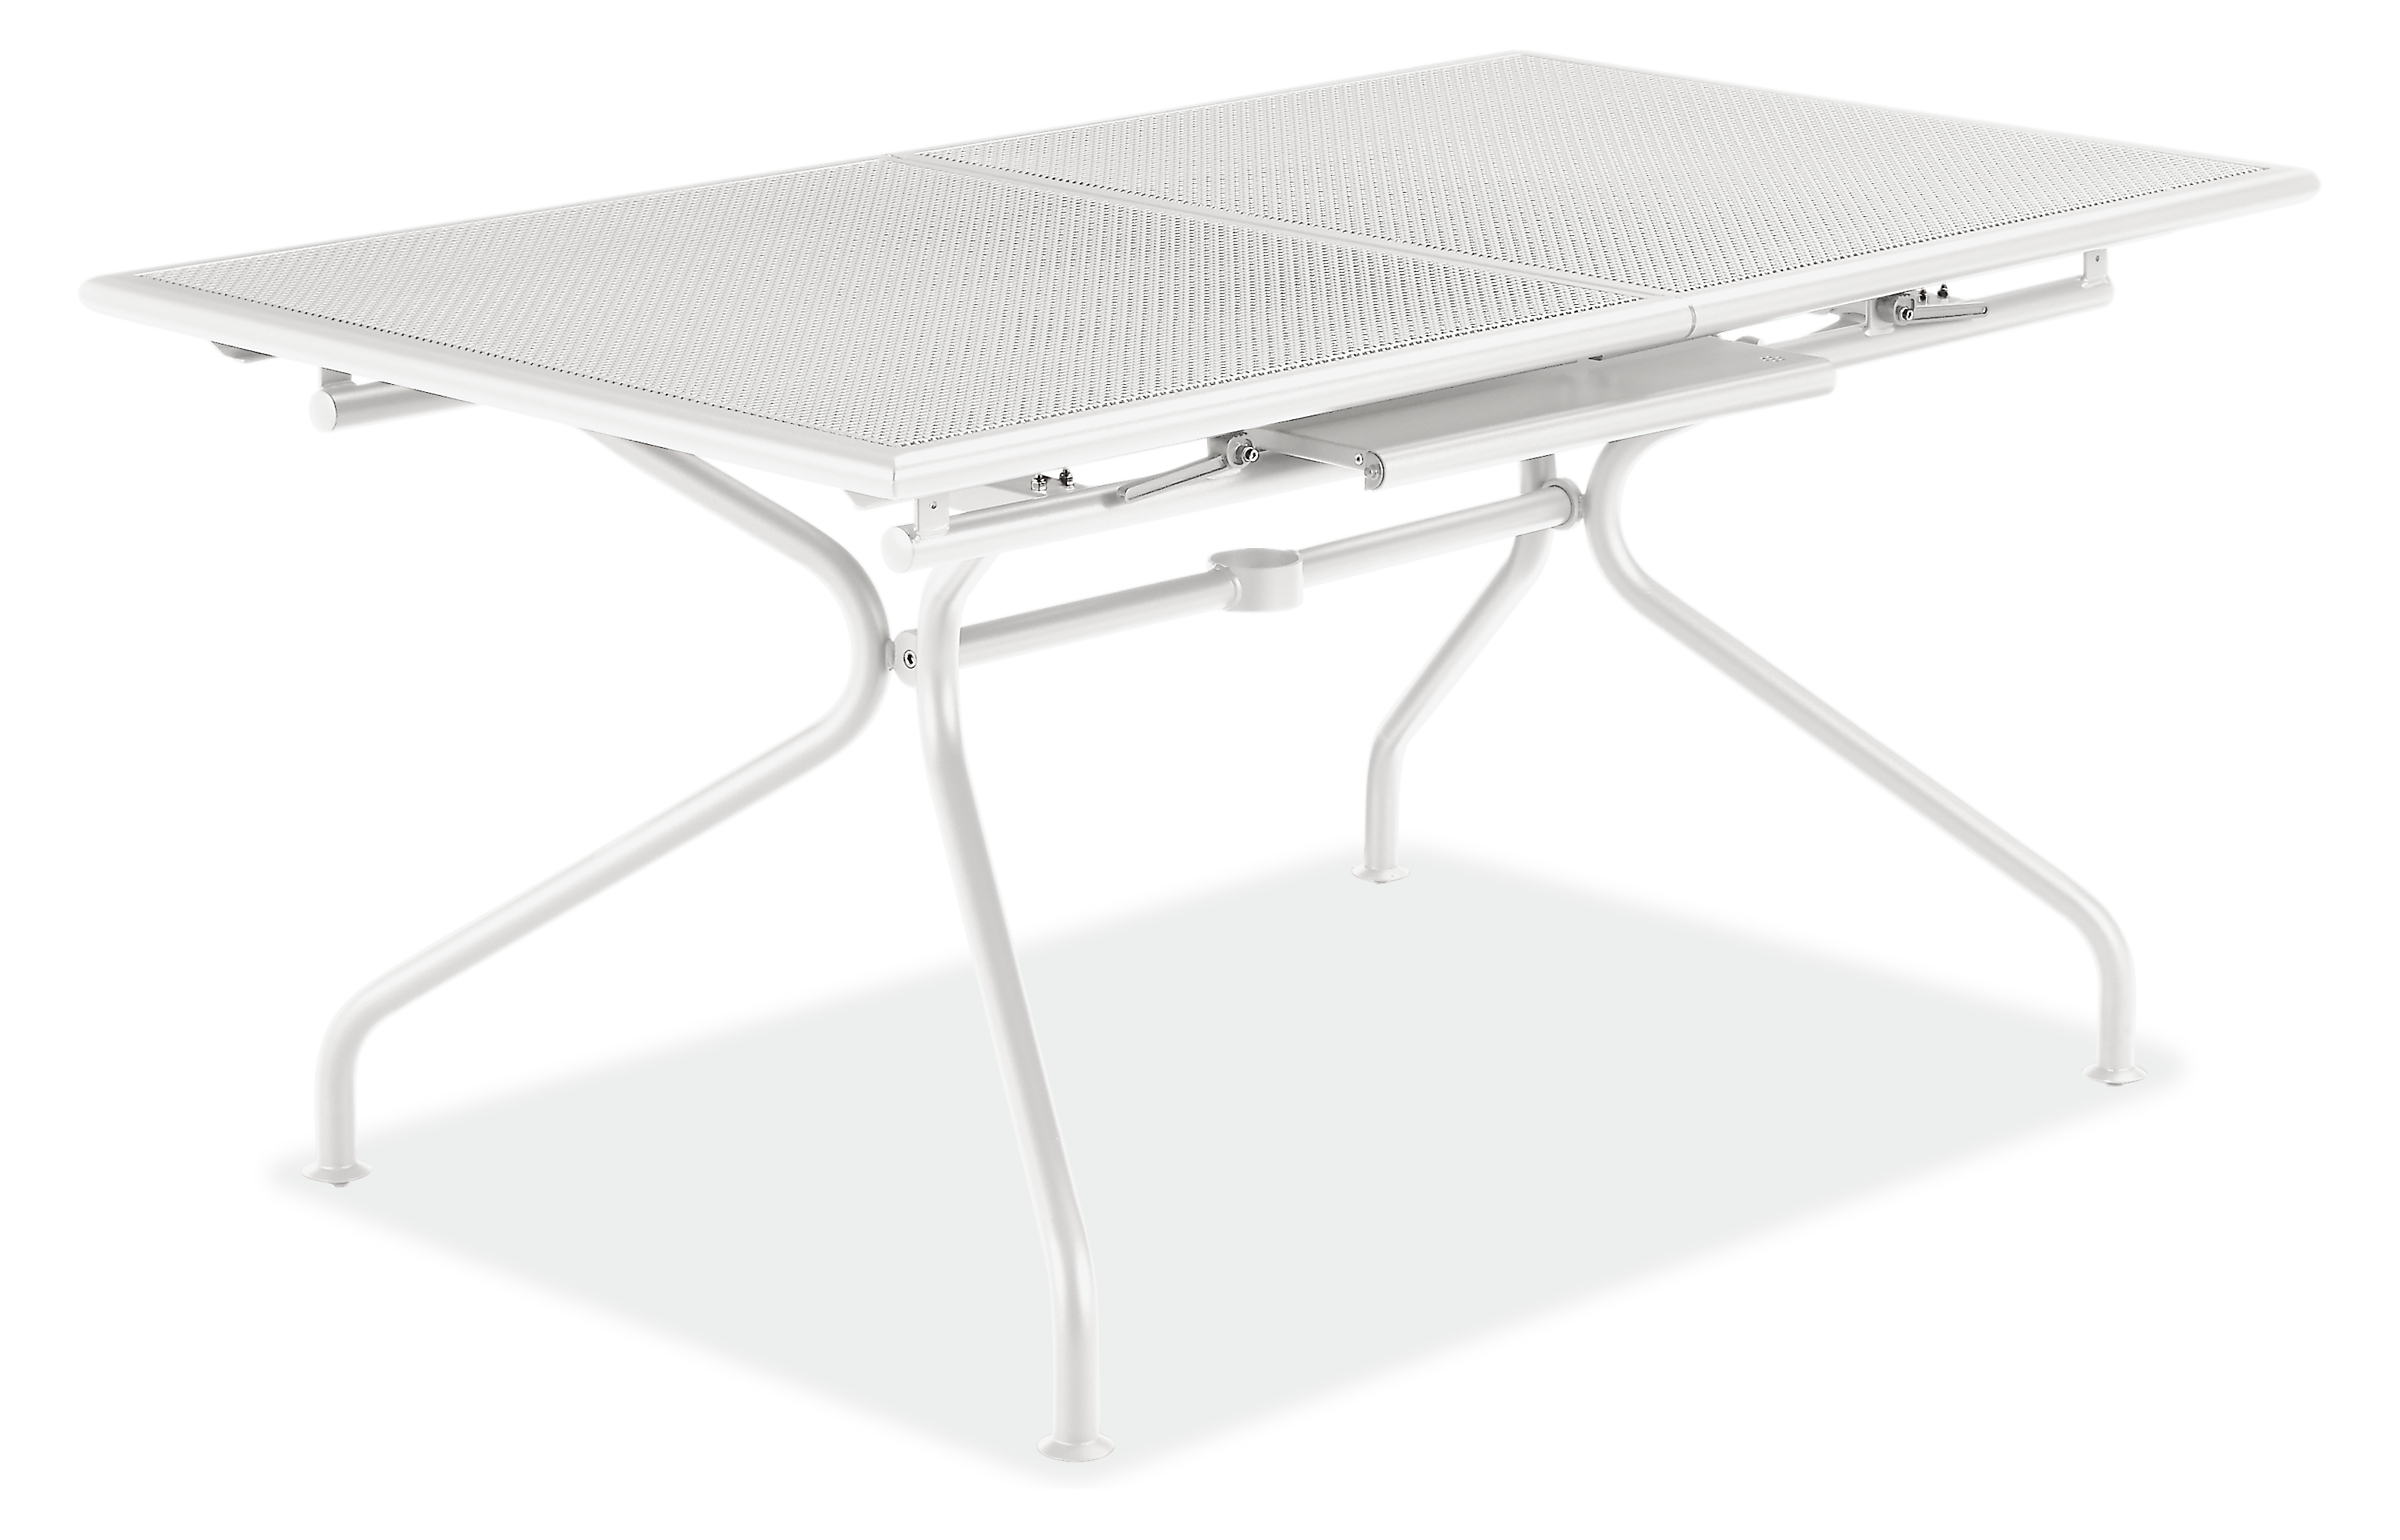 Kona 63w 36d 30h Extension Table with One 20" Leaf